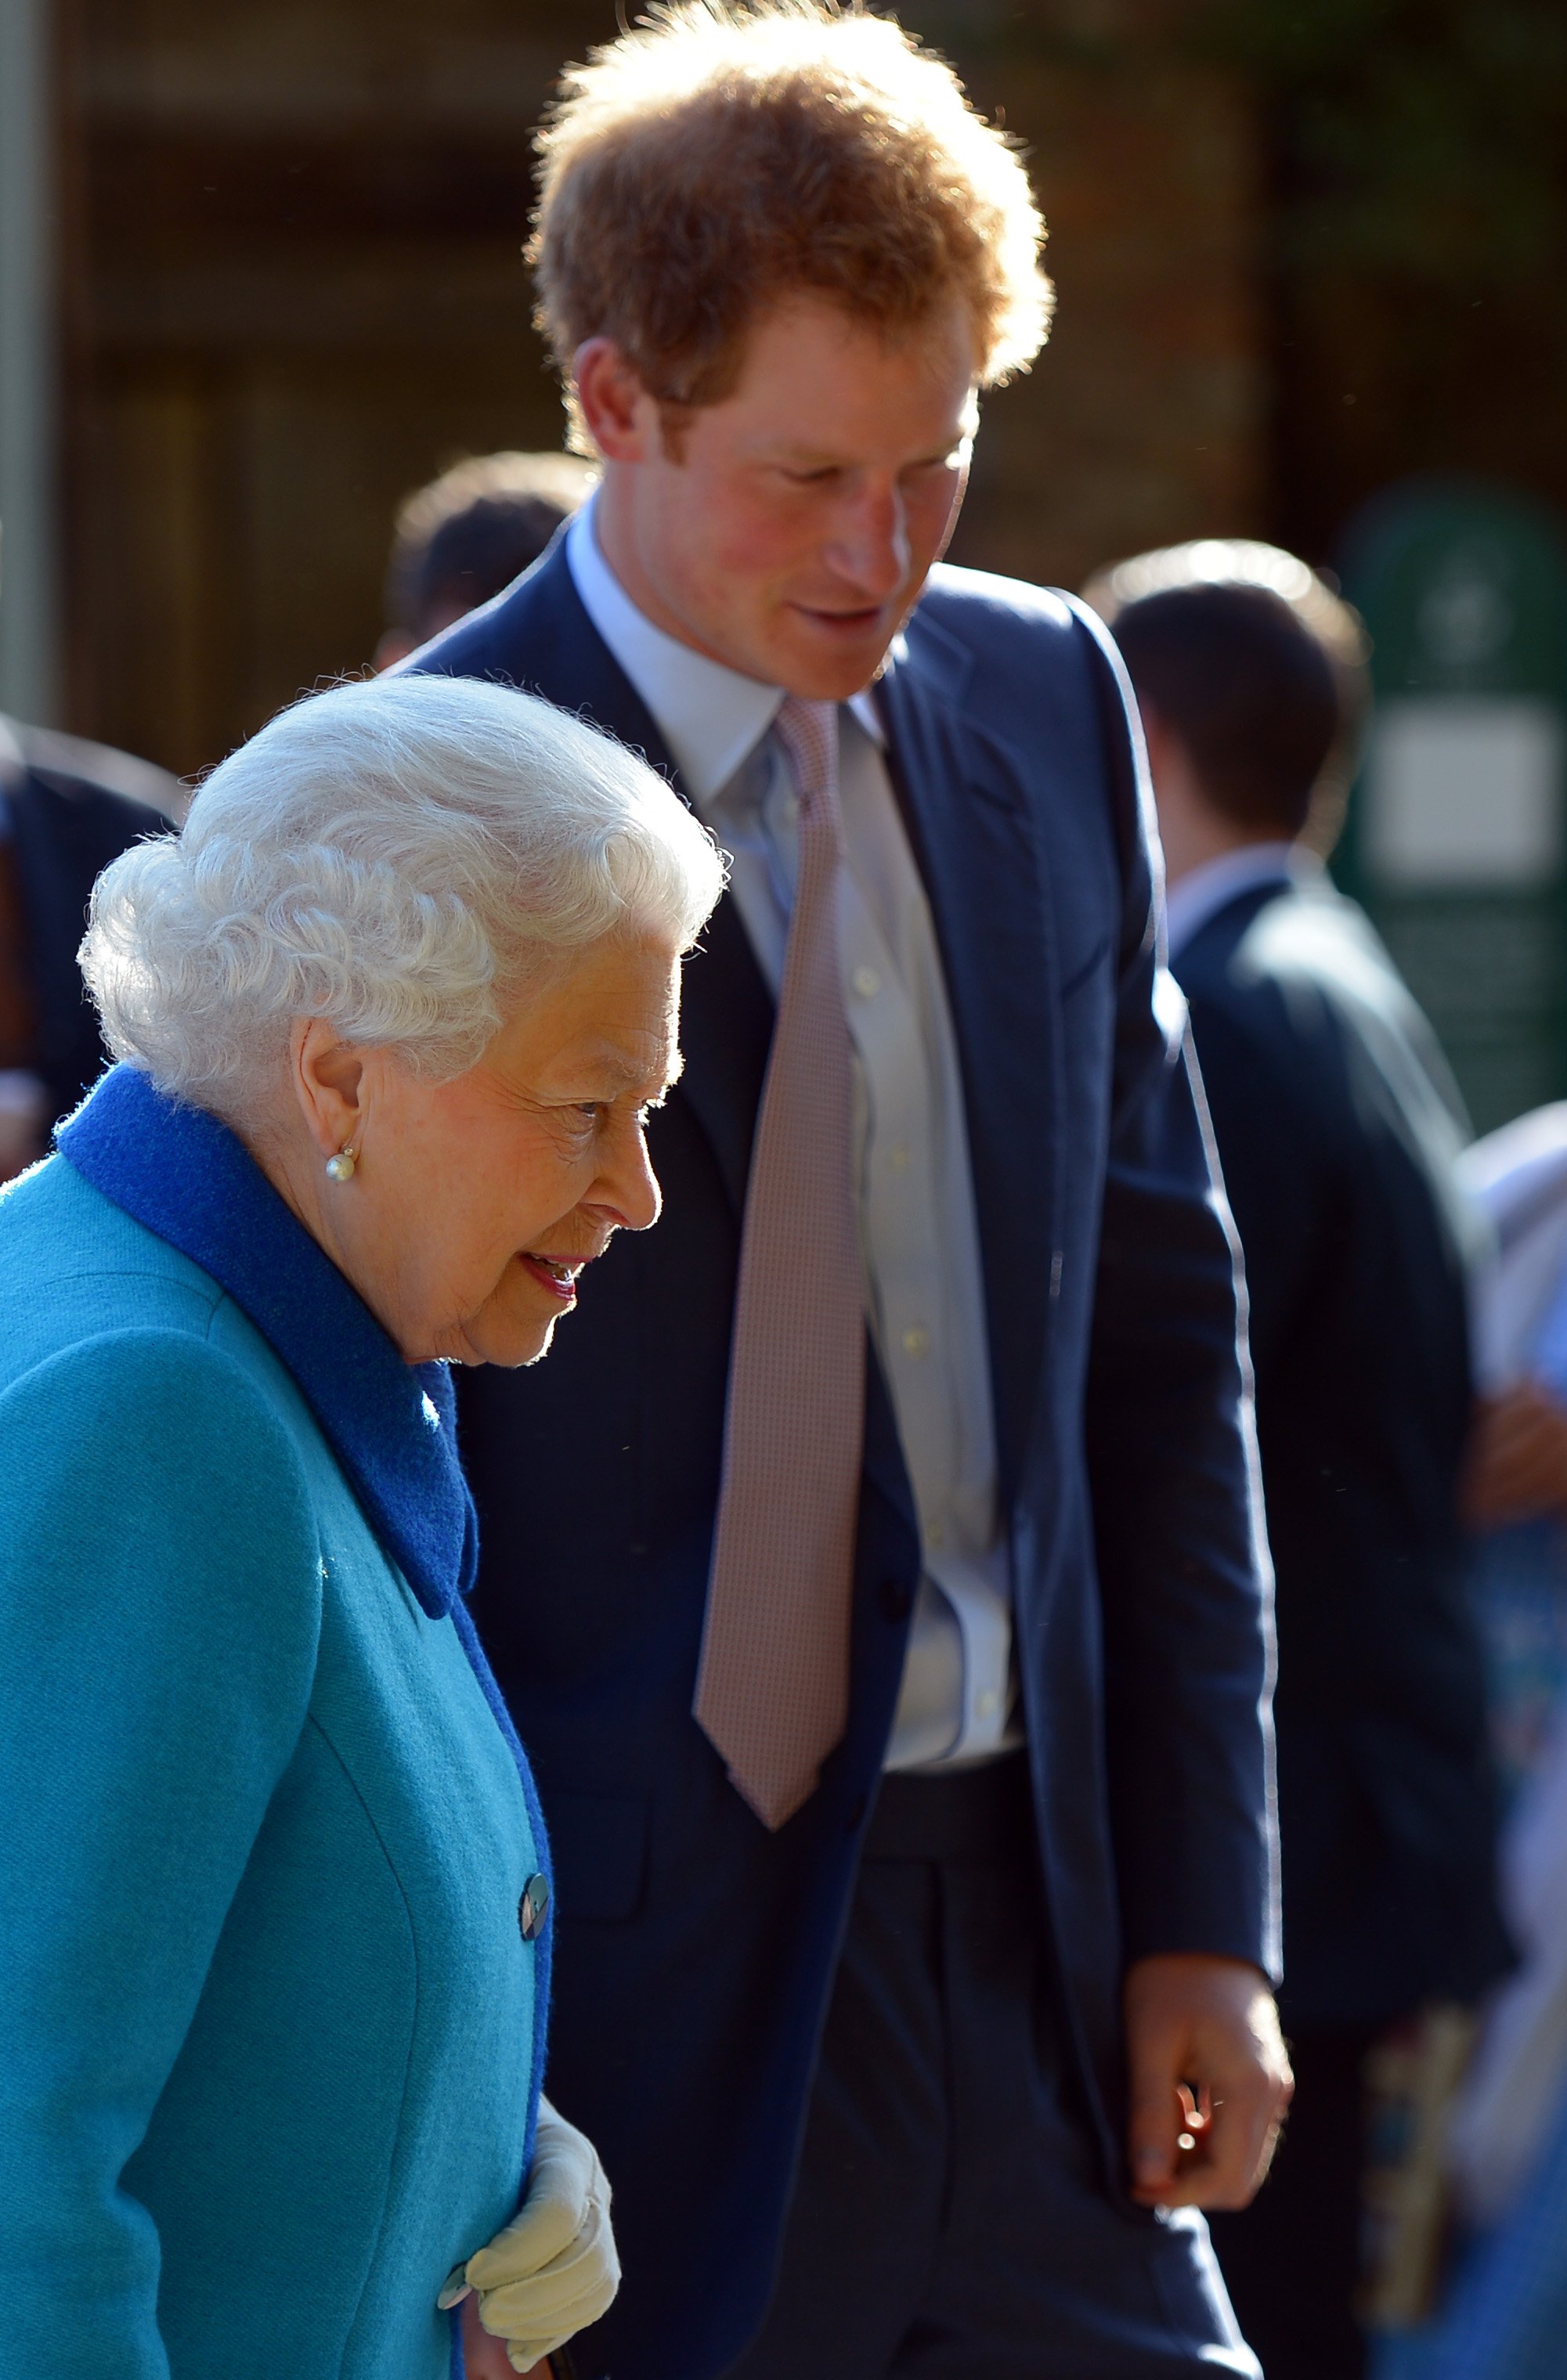 Queen Elizabeth II and Prince Harry attend the annual Chelsea Flower Show at Royal Hospital Chelsea on May 18, 2015, in London, England. | Source: Getty Images